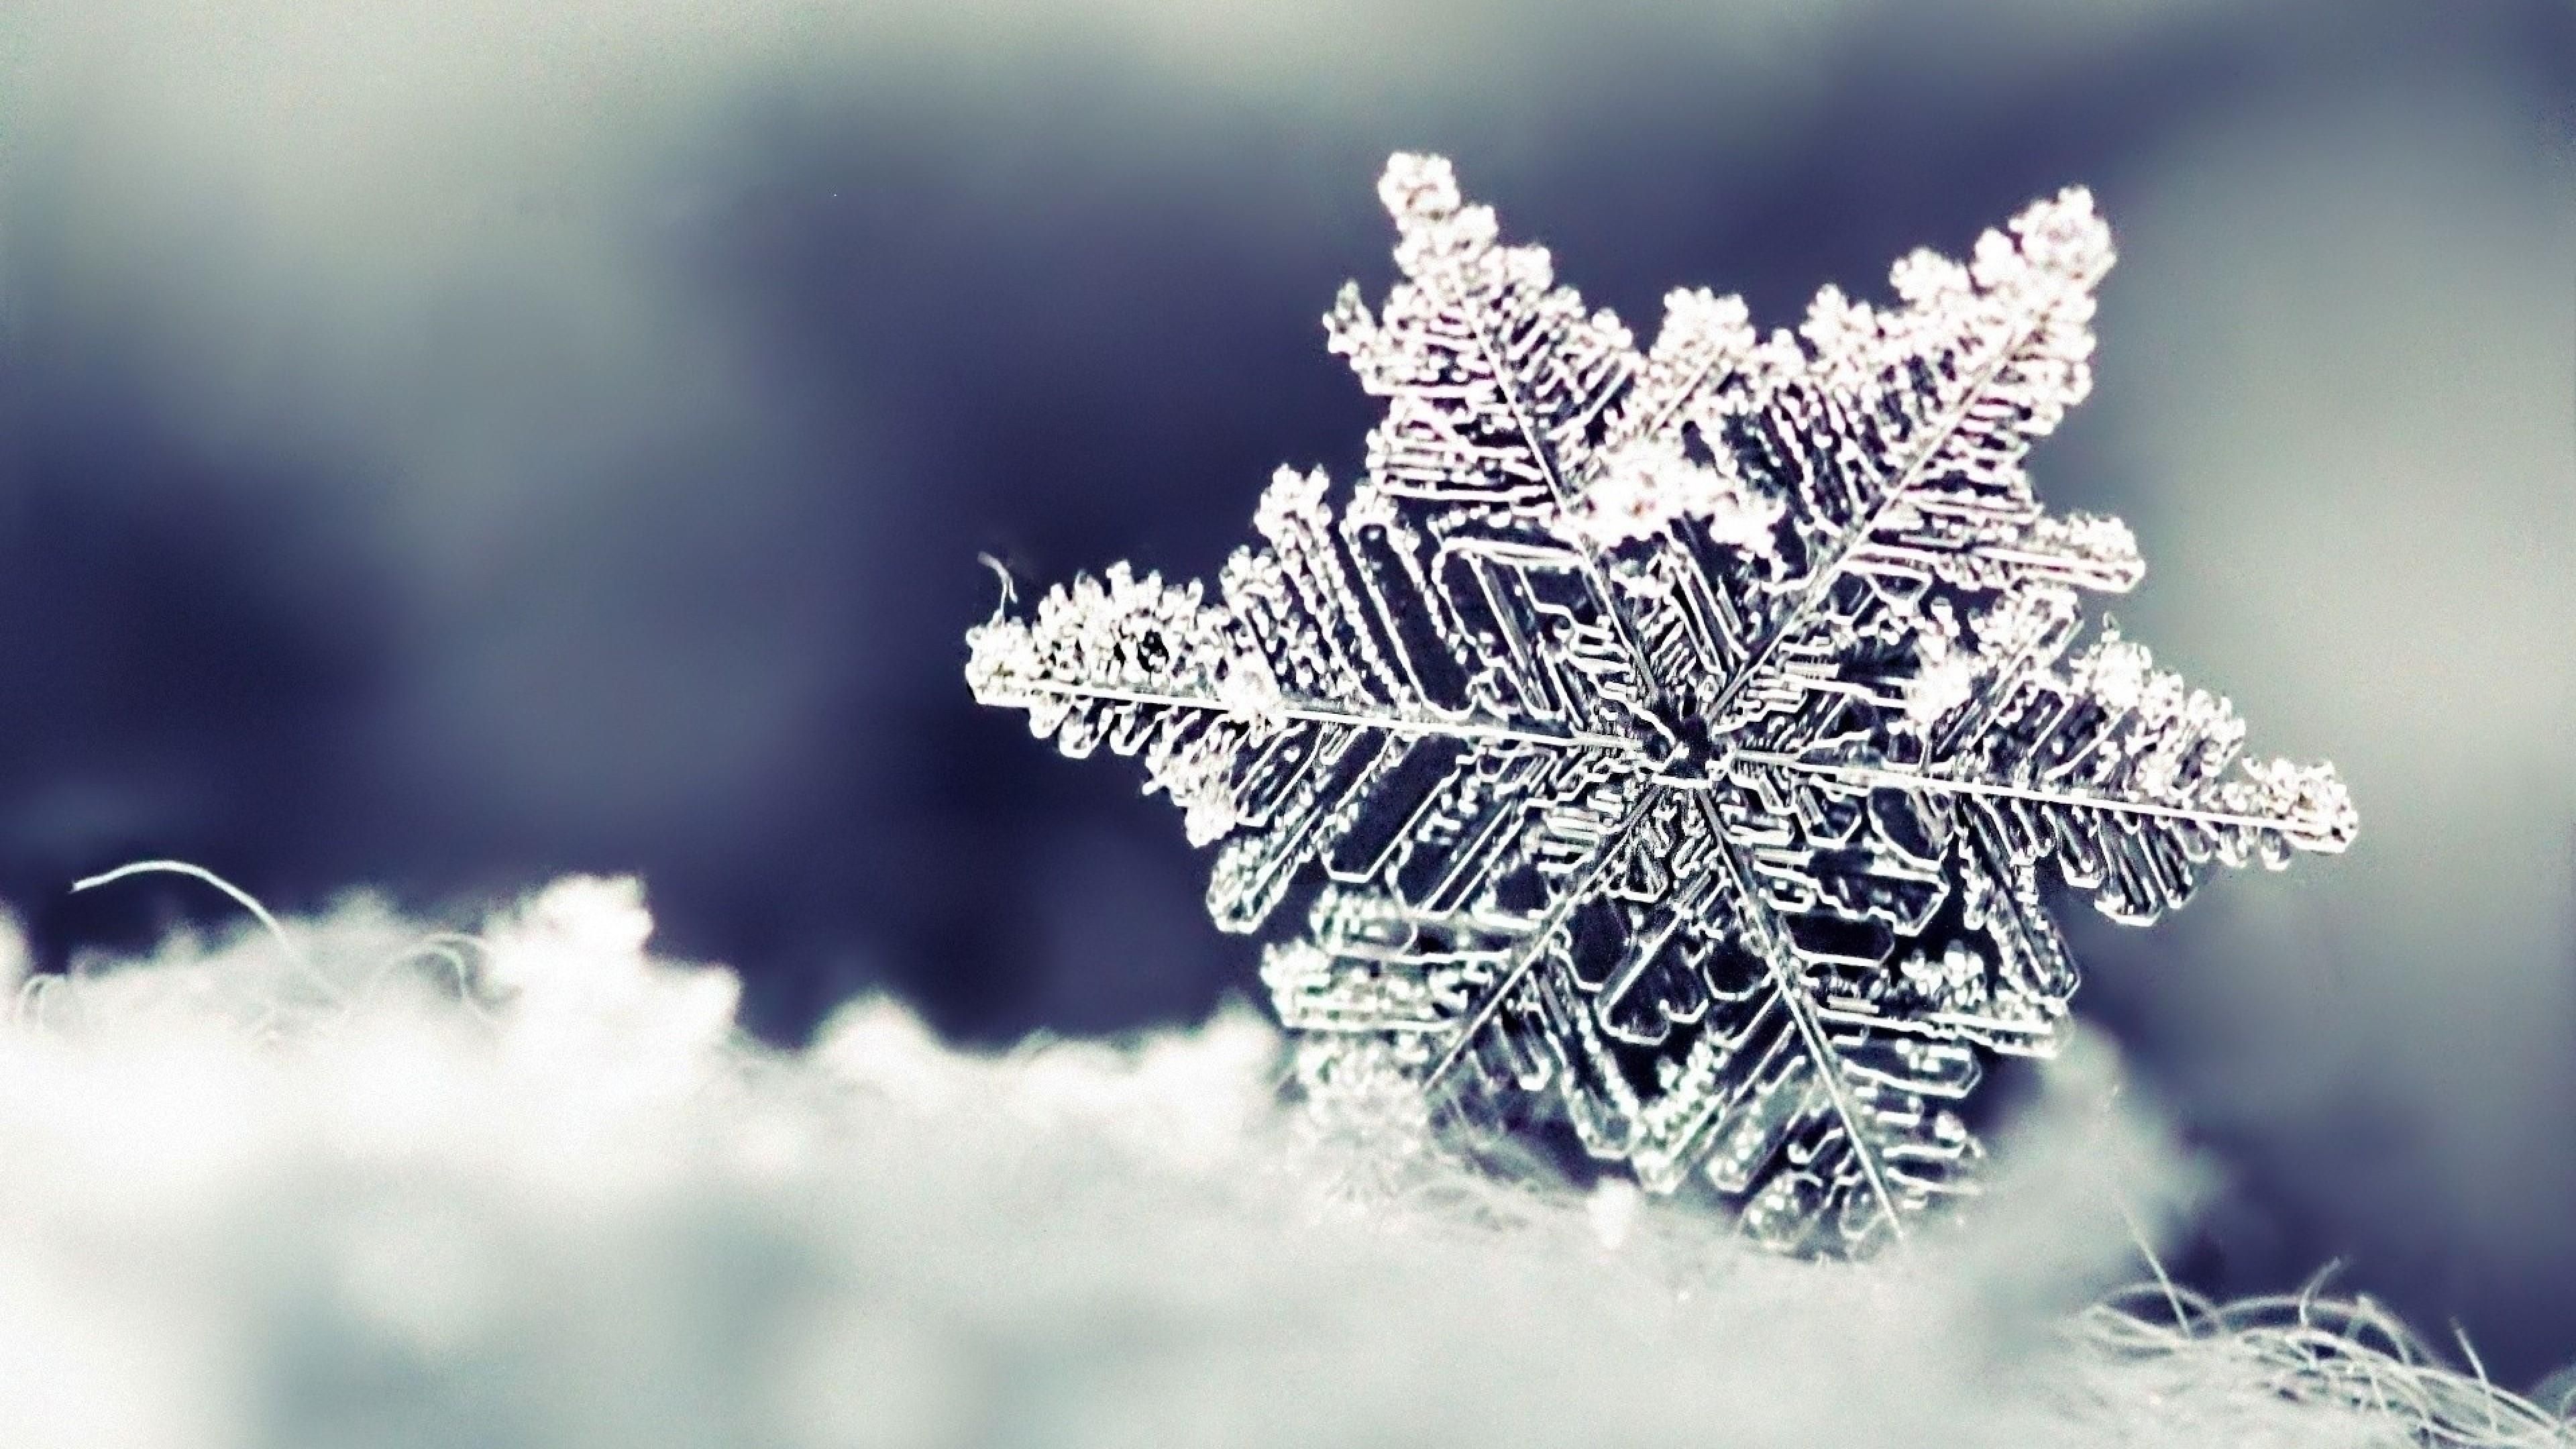 Snowflake Collection See All #Wallpaper, #wallpaper #background #nature. Good morning winter image, Snowflake wallpaper, Nature background iphone